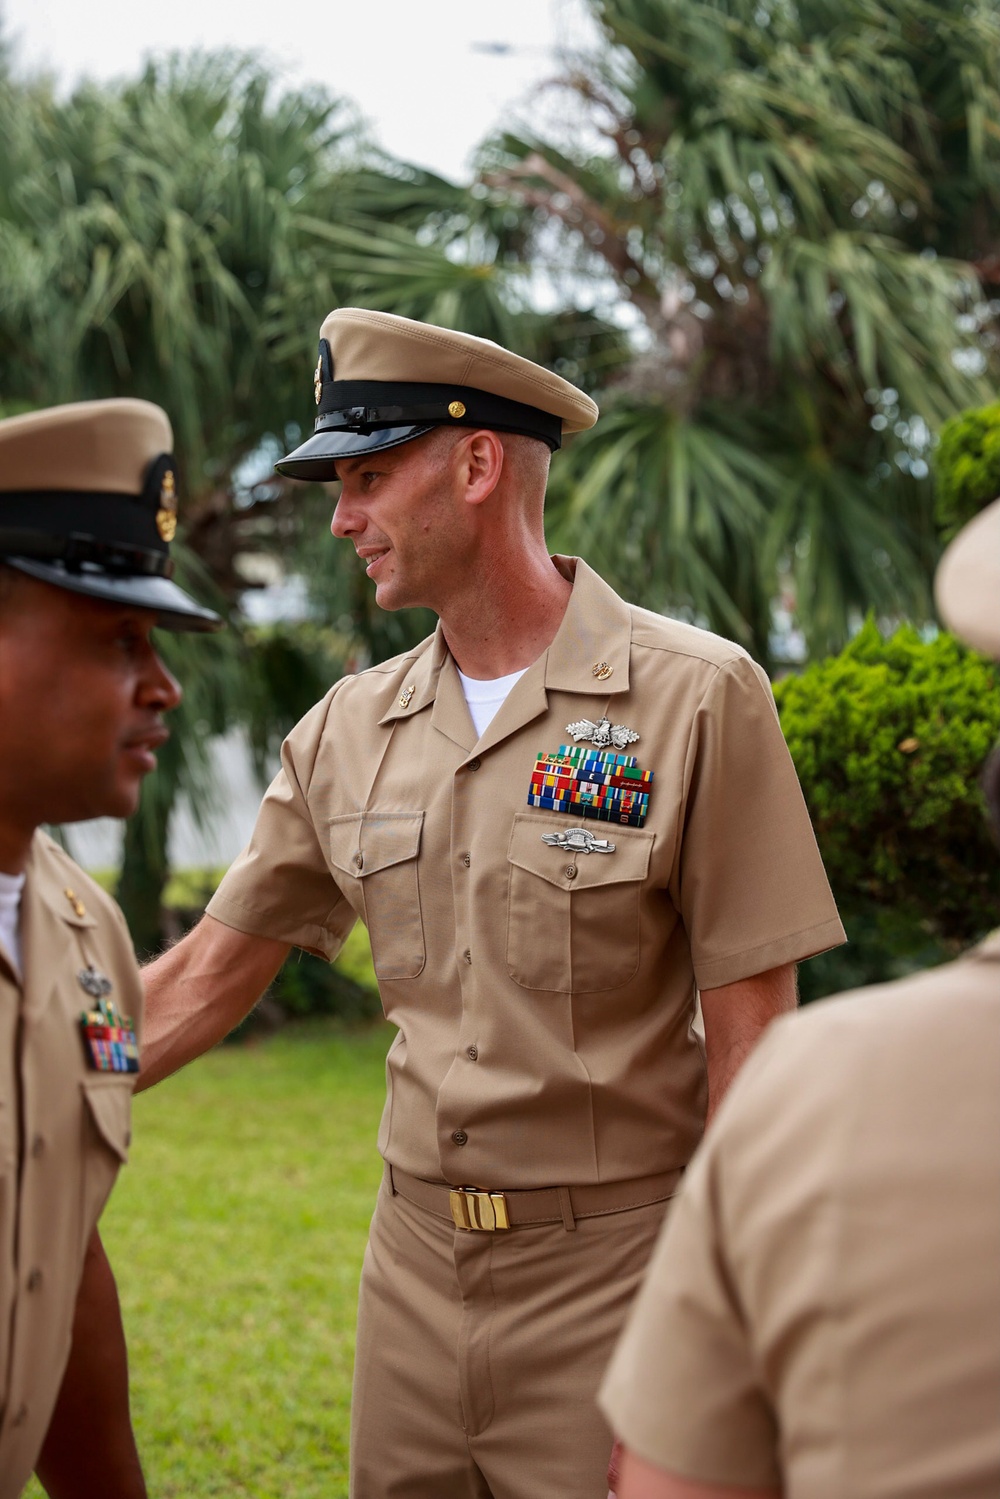 Cheif Utilitesman Jacob Weatherford being congratulated after the Cheif Petty Officer Pinning Cereymony onboard Kadena Air Force Base.